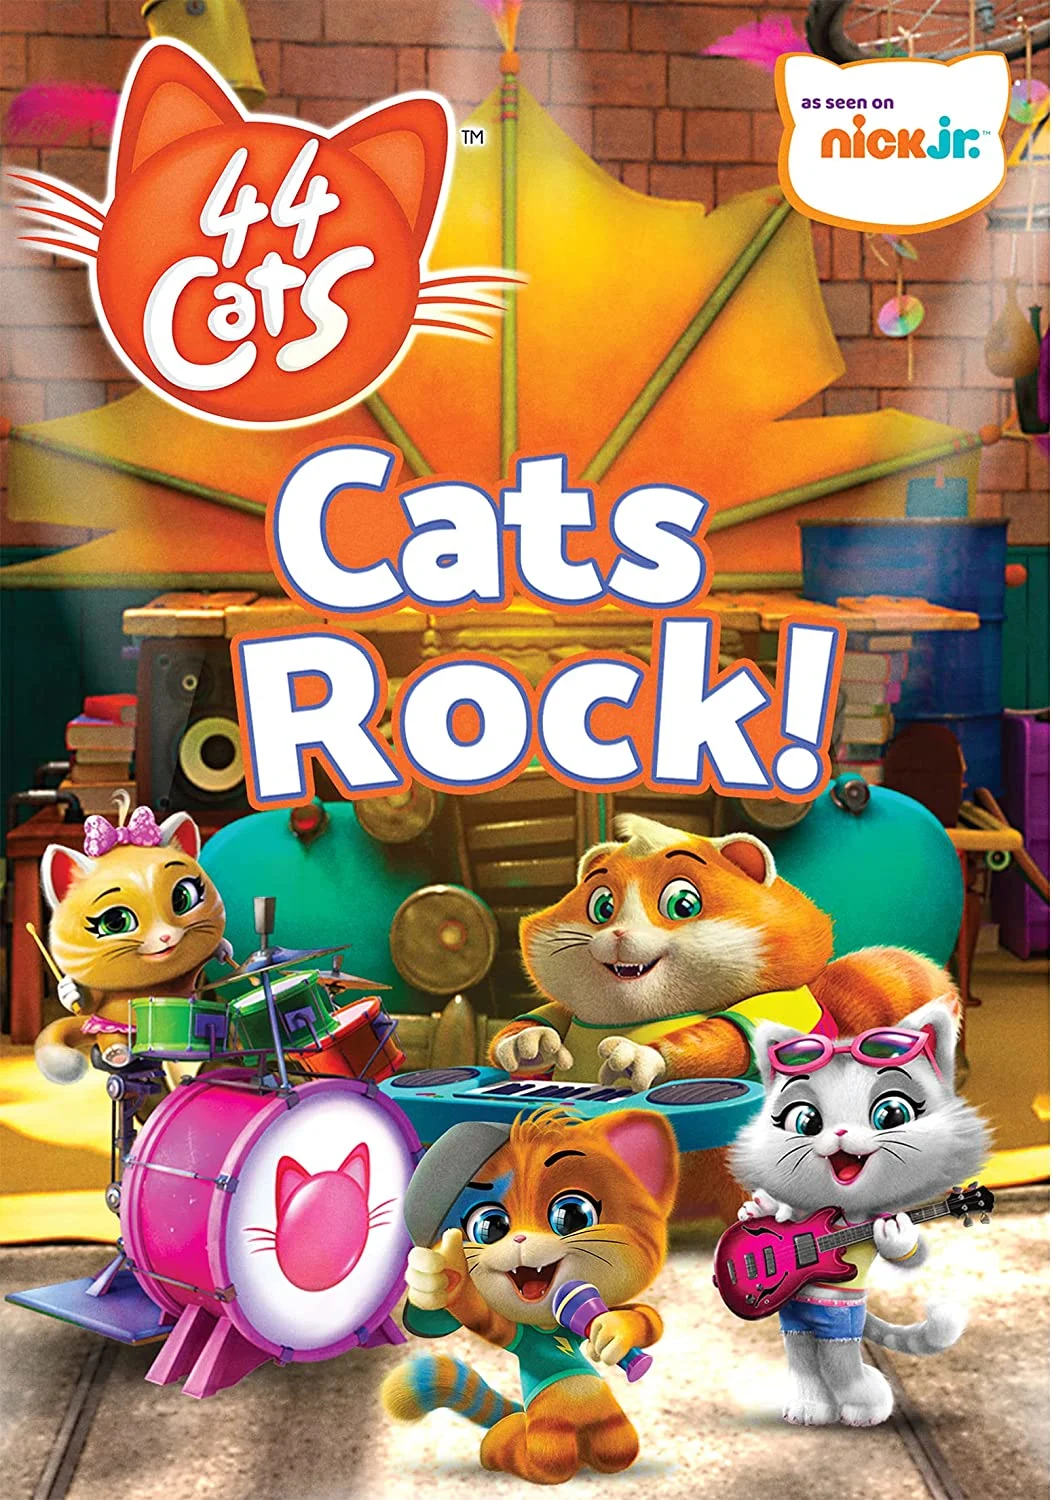 44 Cats: Cats Rock! (DVD) on MovieShack